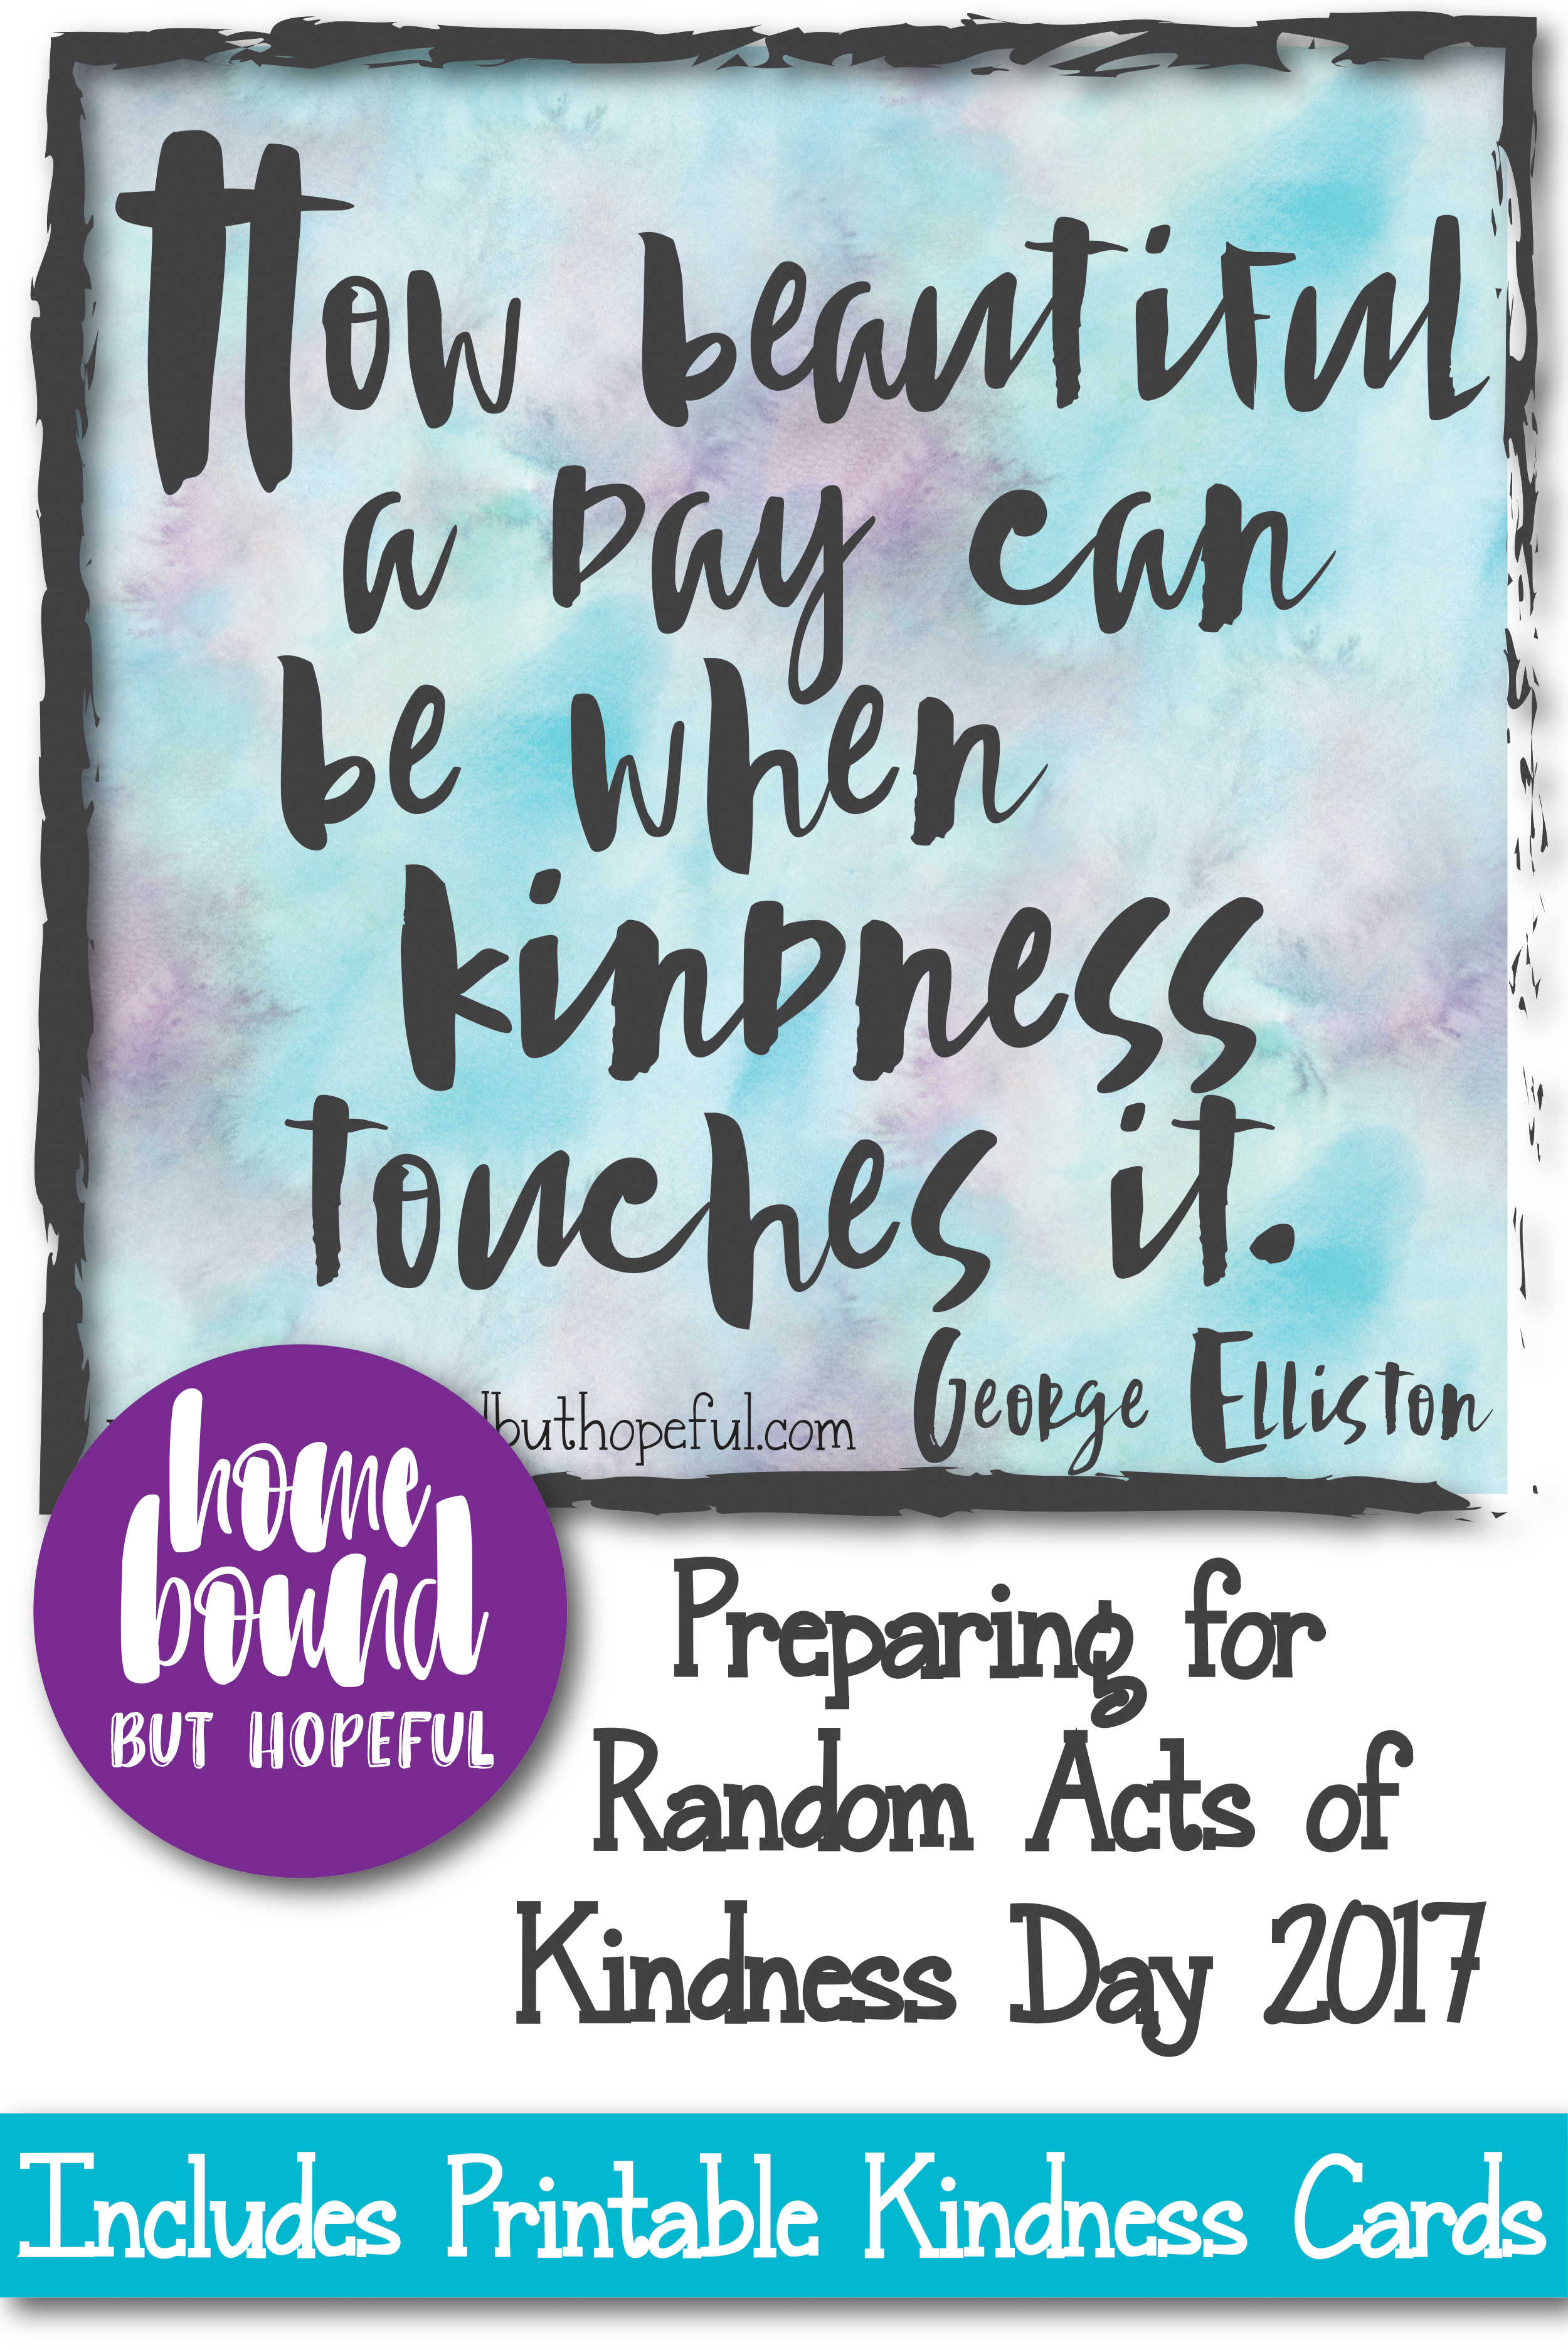 Please consider joining us as we prepare for Random Acts of Kindness Day. I've included 25 ideas for ways to show kindness, as well as a free printable handout. Think about spreading some love in memory of my son, who would turned 3 on the holiday this year. #ForAviWithLove